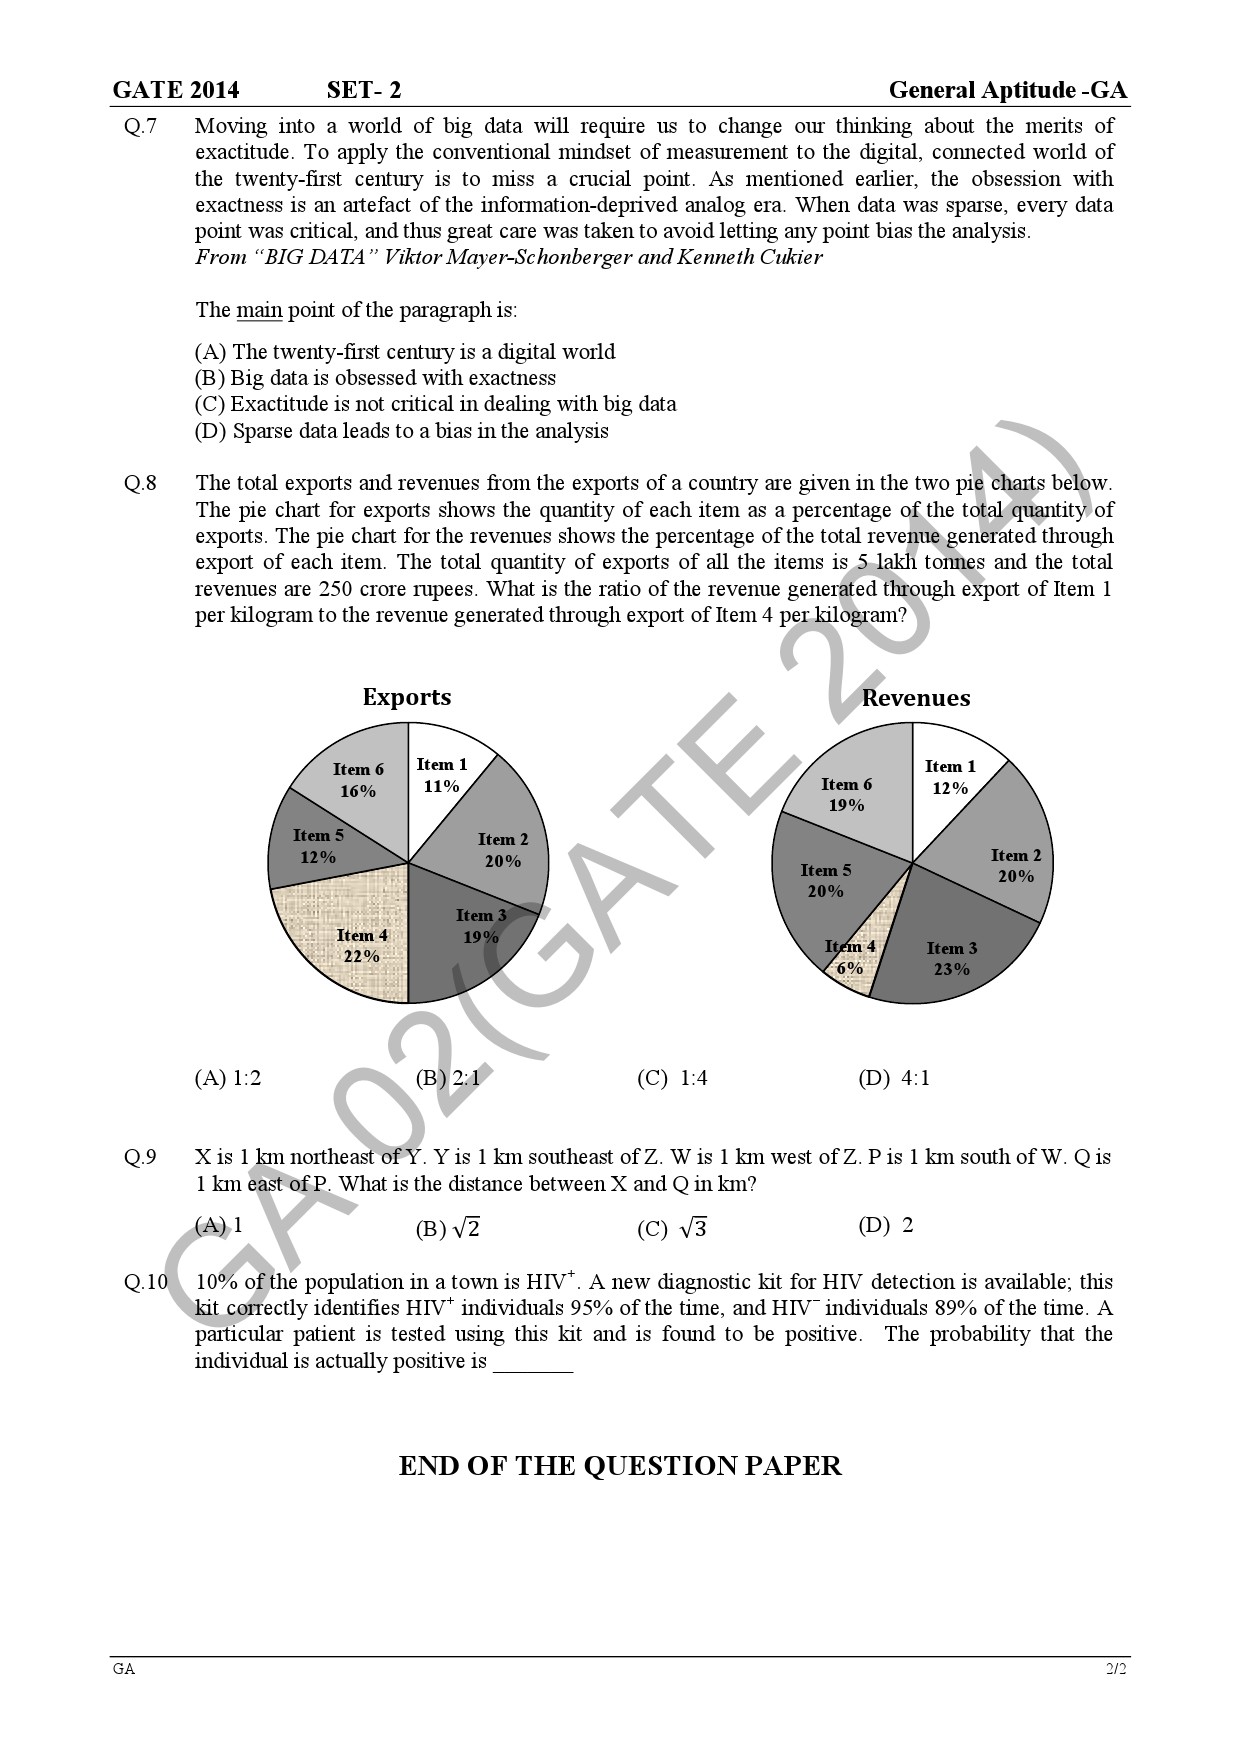 GATE Exam Question Paper 2014 Biotechnology 6